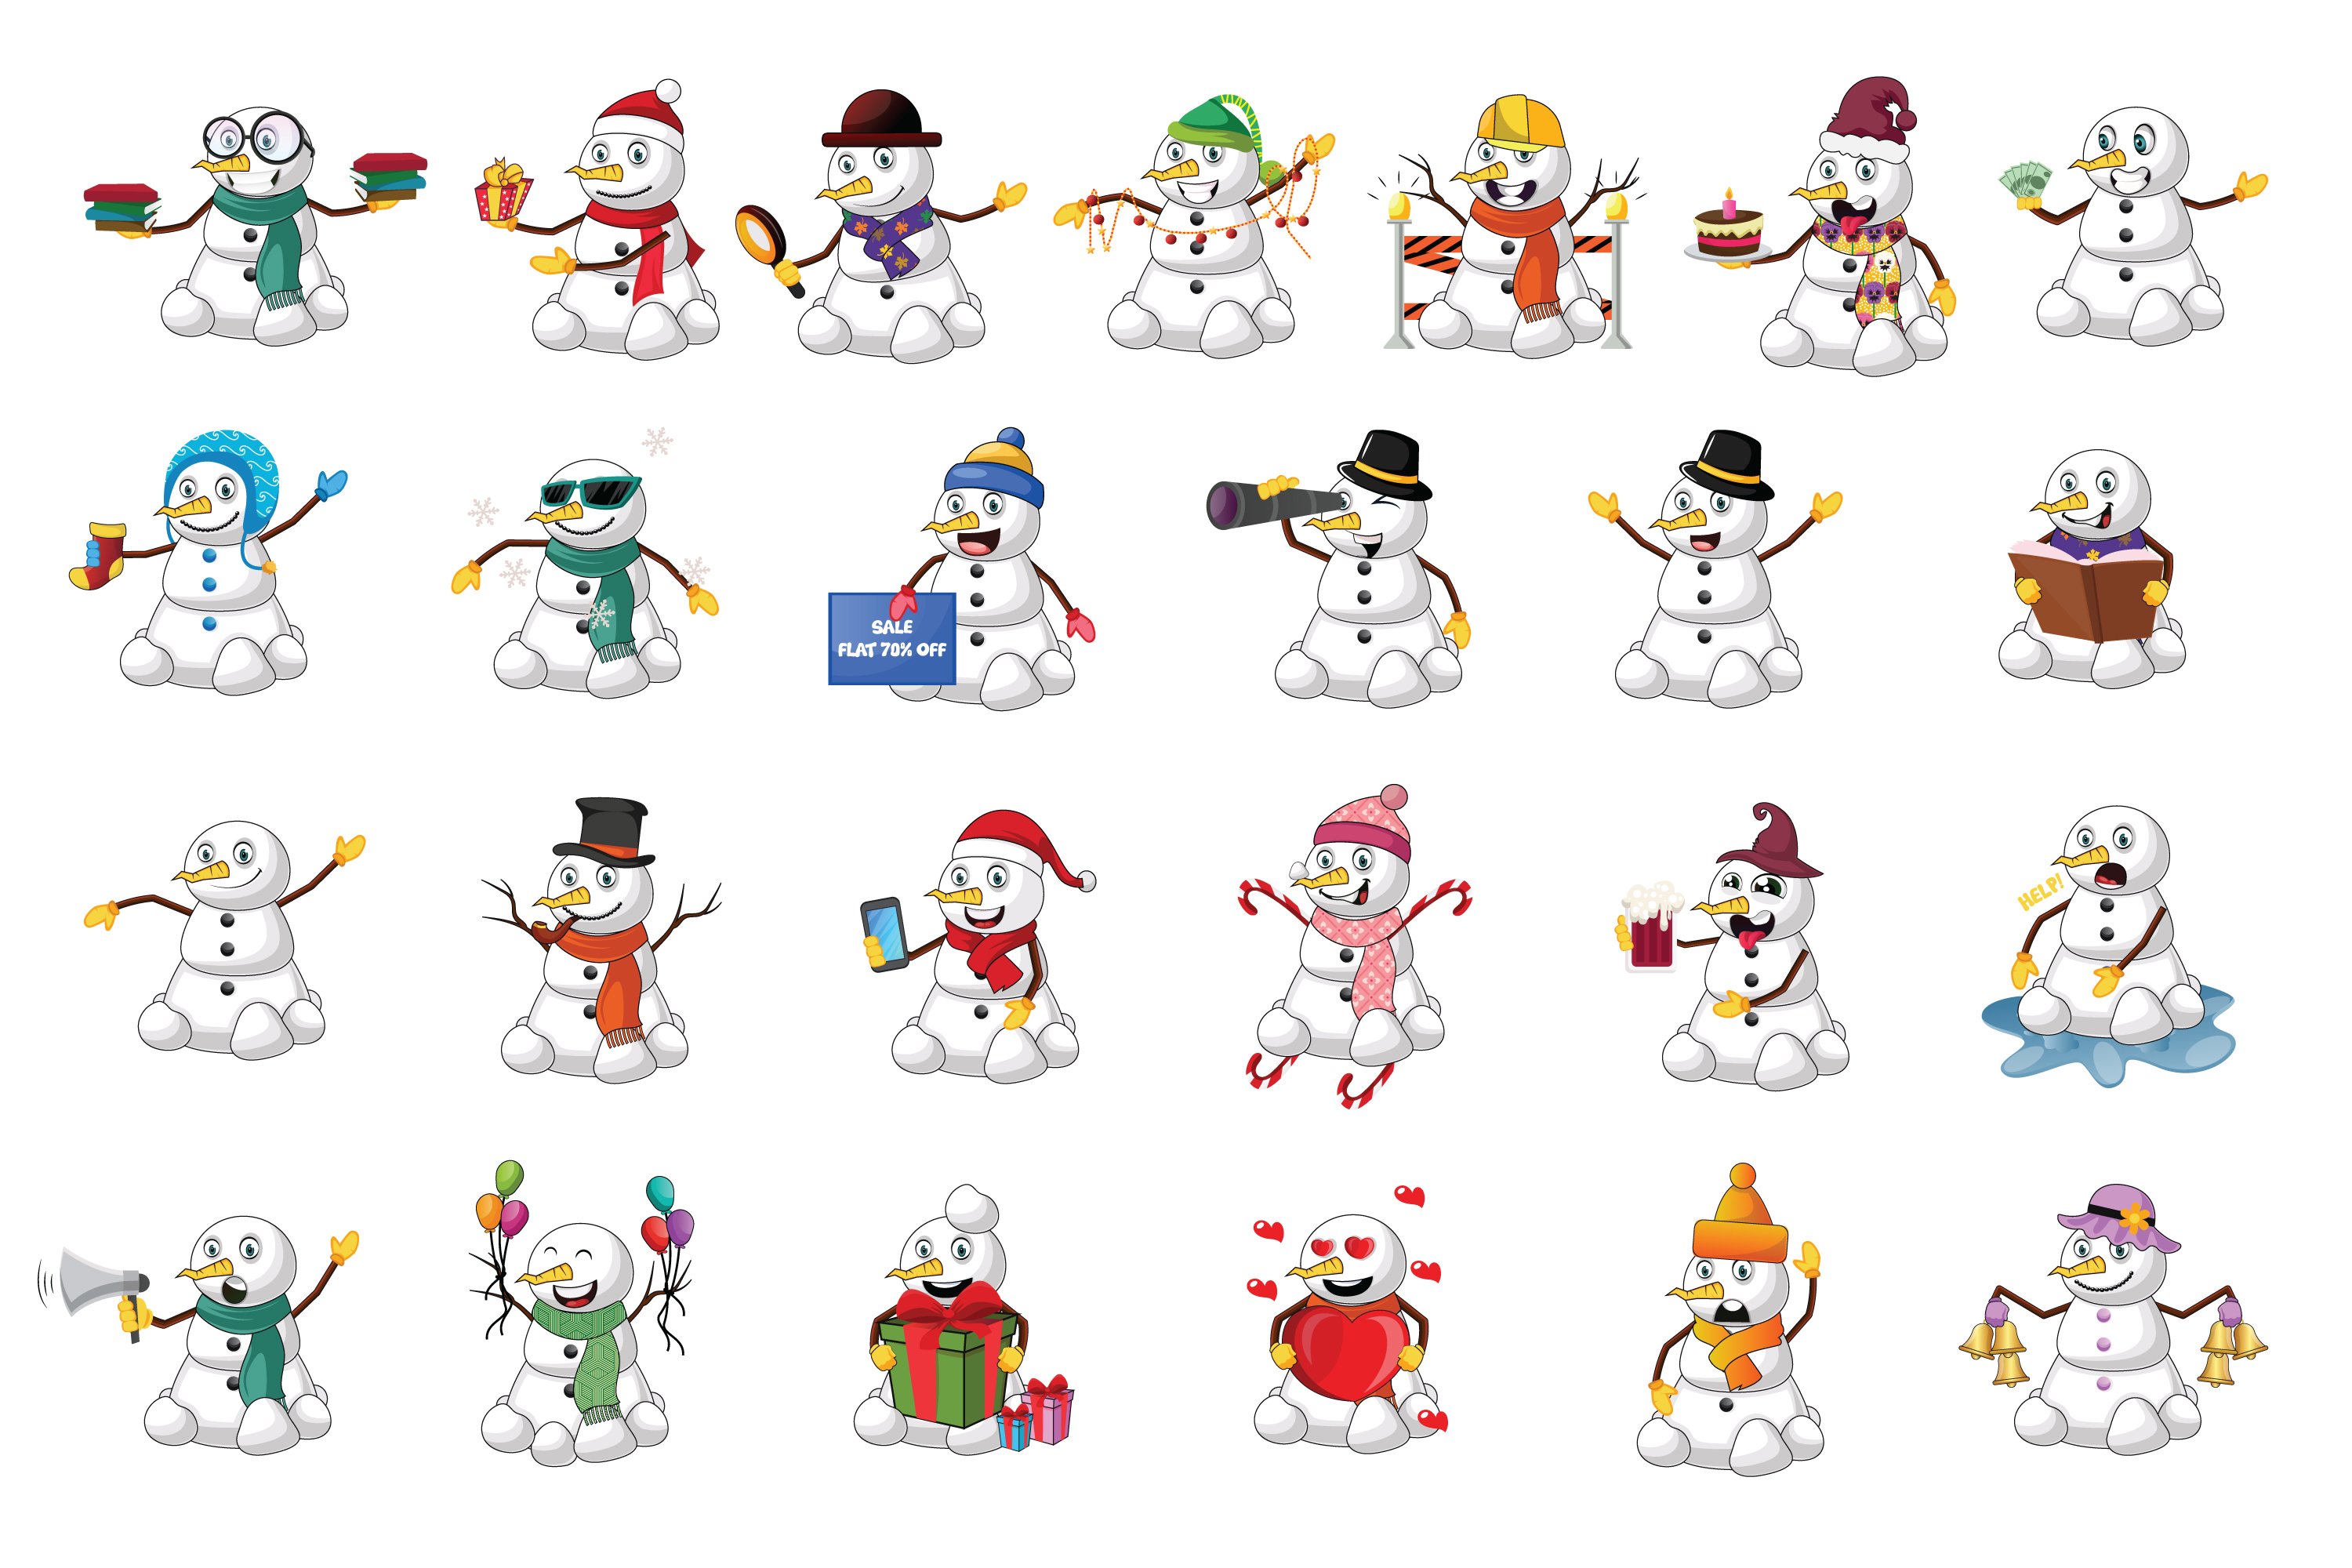 Cover with images of adorable snowmen.